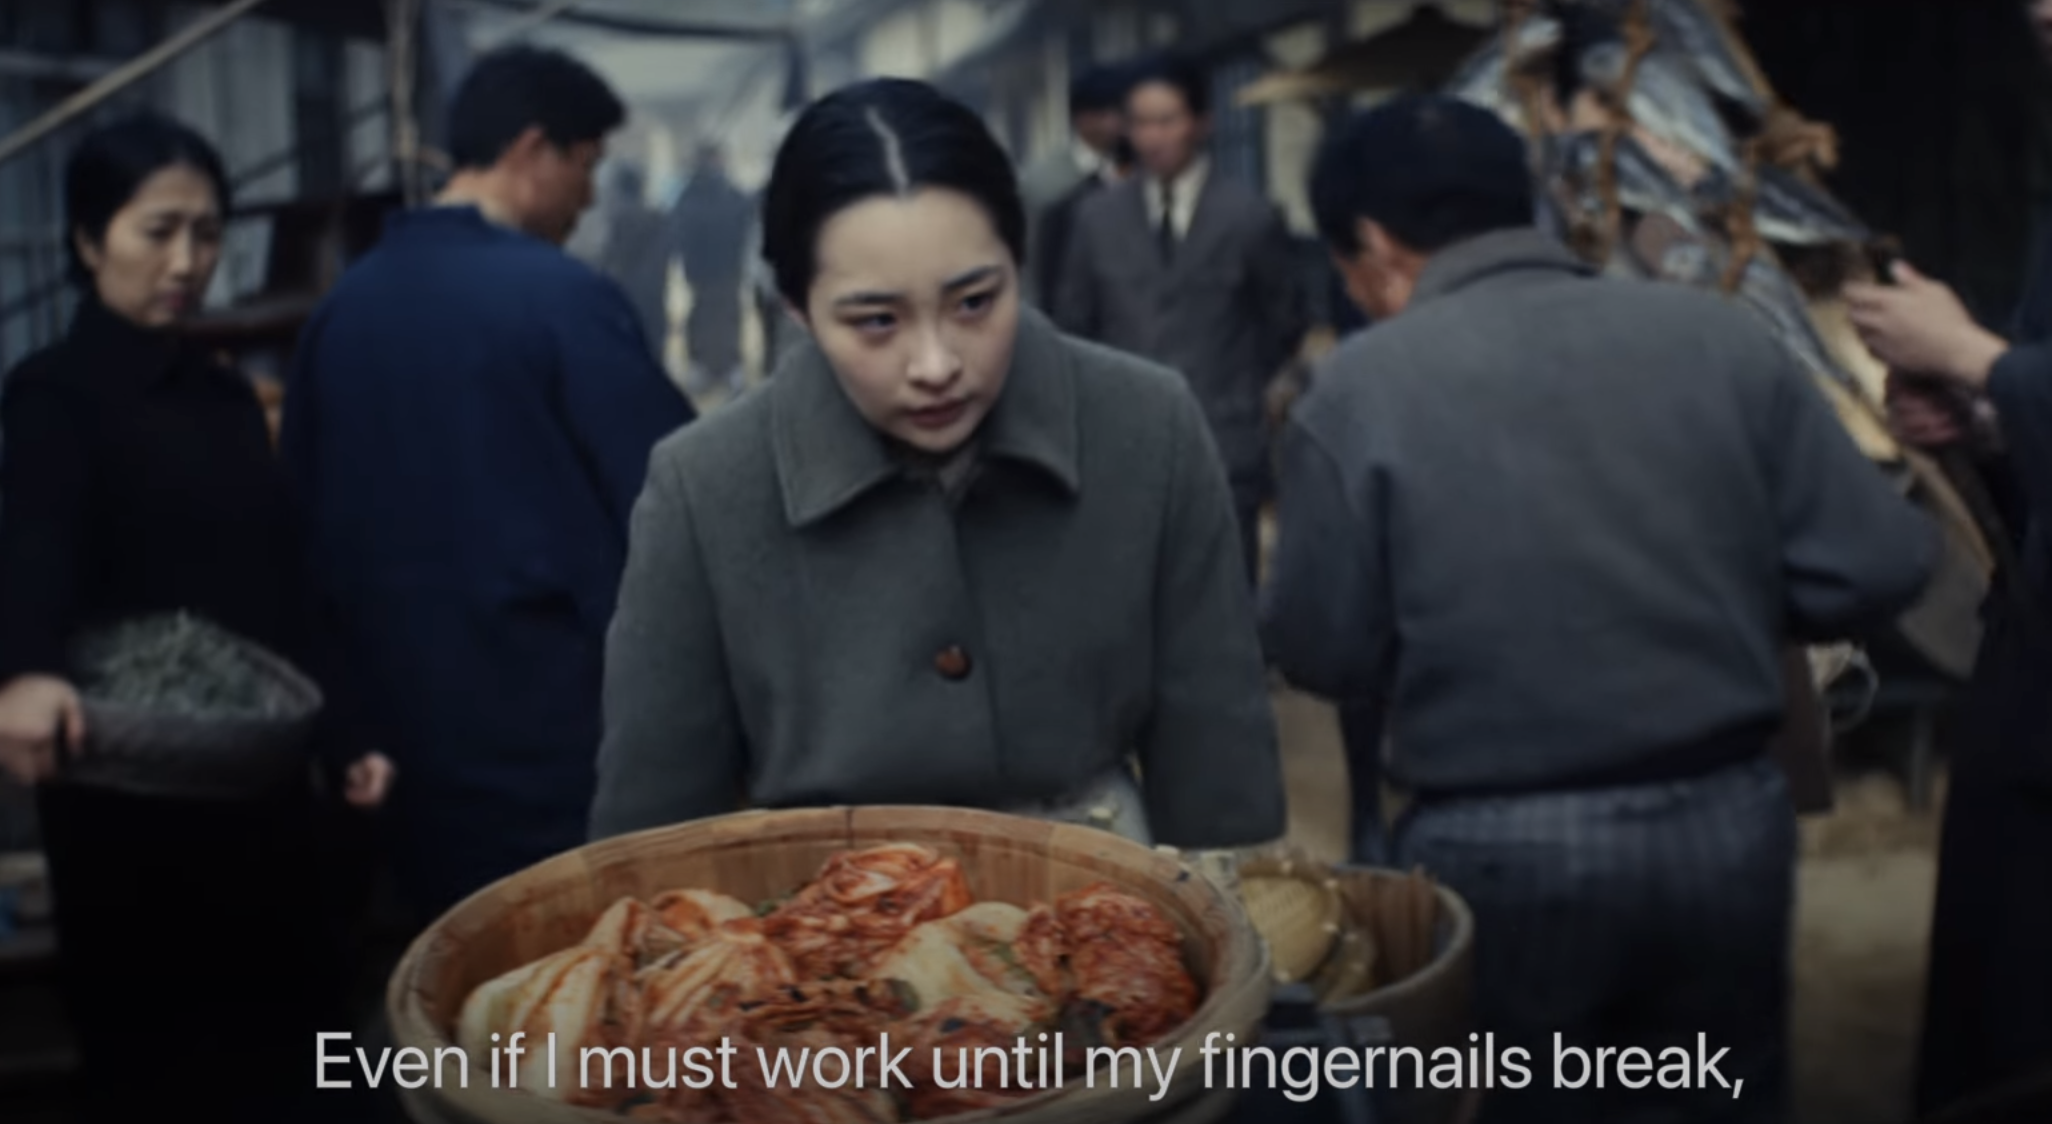 Sunja pushing cart in market with the caption &quot;Even if I must work until fingernails break&quot;